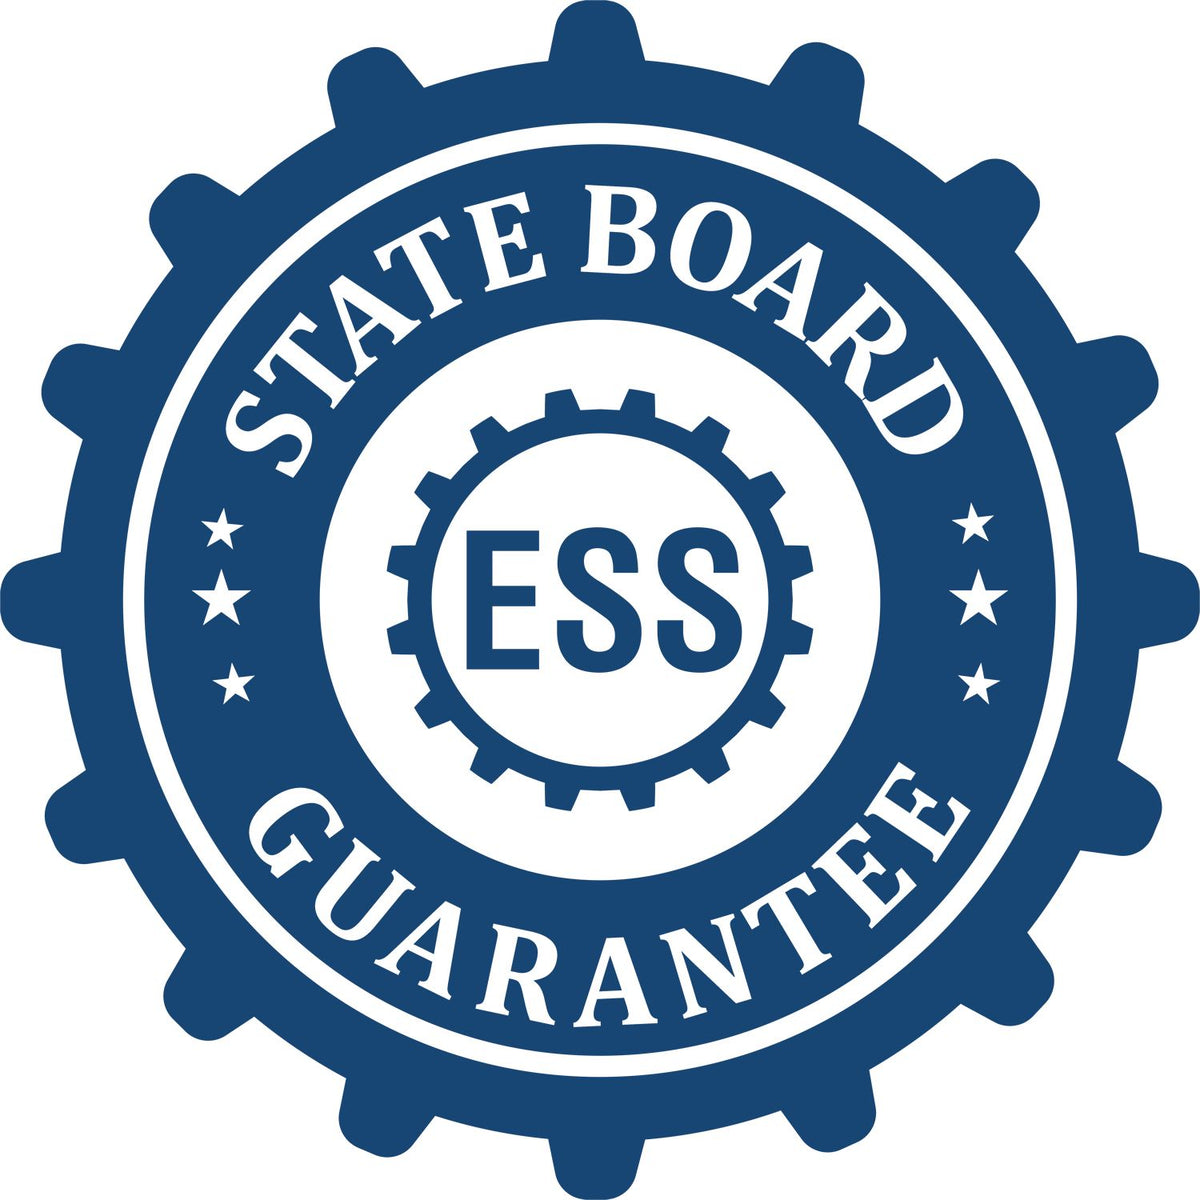 An emblem in a gear shape illustrating a state board guarantee for the Digital Kentucky Geologist Stamp, Electronic Seal for Kentucky Geologist